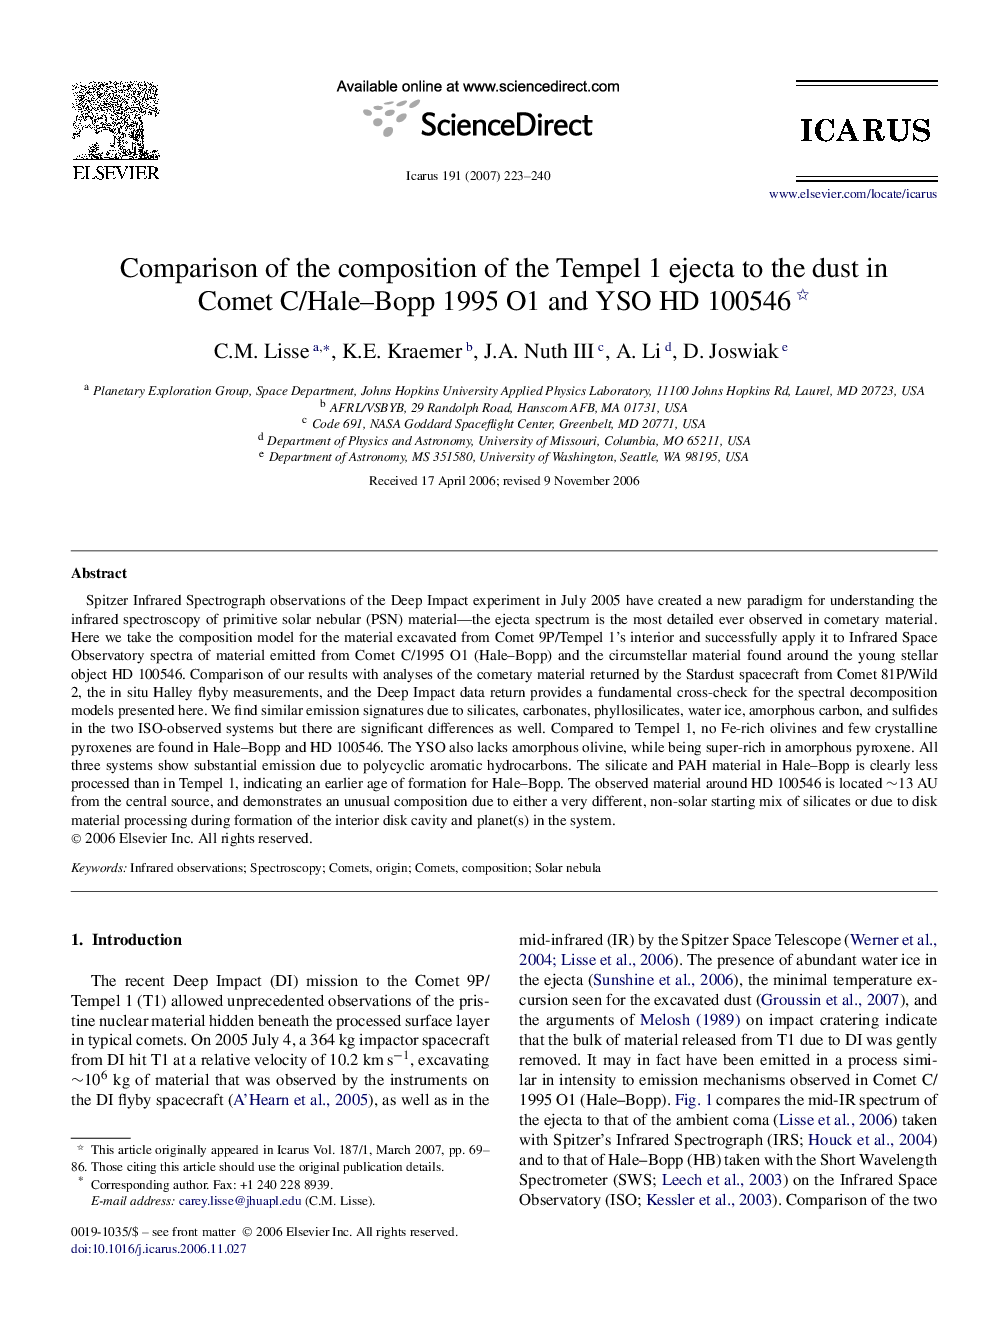 Comparison of the composition of the Tempel 1 ejecta to the dust in Comet C/Hale–Bopp 1995 O1 and YSO HD 100546 